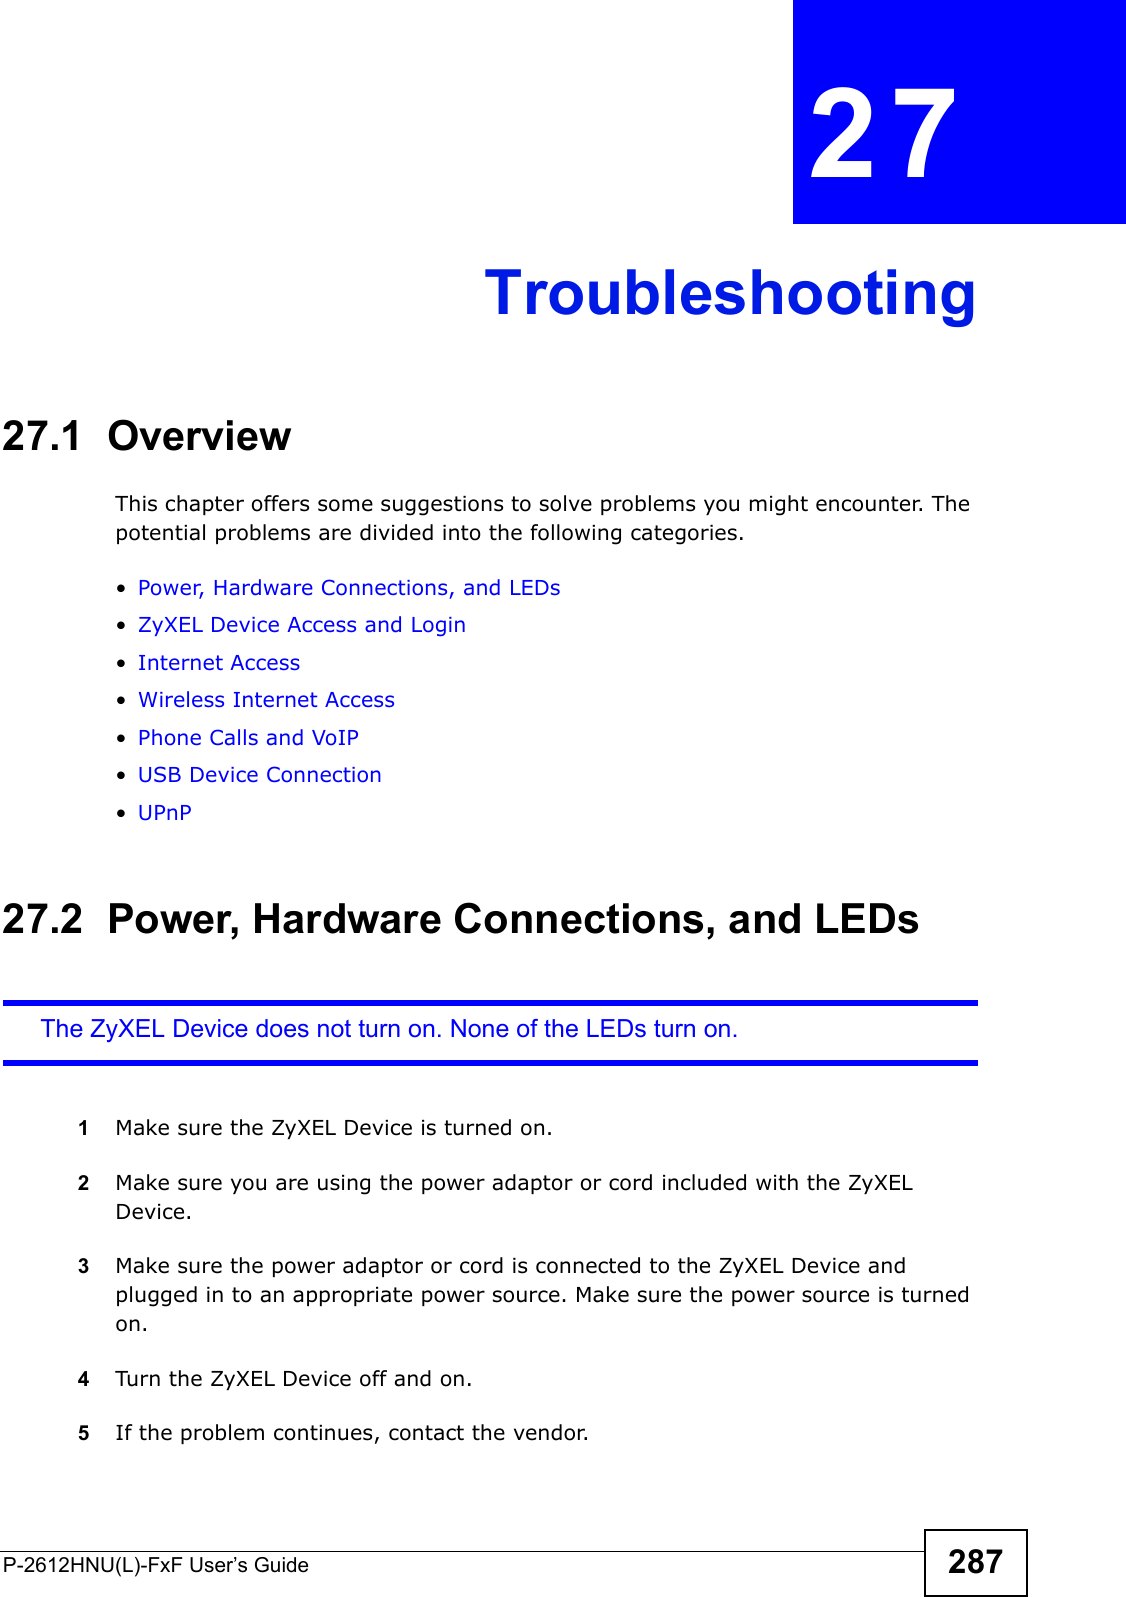 P-2612HNU(L)-FxF User’s Guide 287CHAPTER   27 Troubleshooting27.1  OverviewThis chapter offers some suggestions to solve problems you might encounter. The potential problems are divided into the following categories. •Power, Hardware Connections, and LEDs•ZyXEL Device Access and Login•Internet Access•Wireless Internet Access•Phone Calls and VoIP•USB Device Connection•UPnP27.2  Power, Hardware Connections, and LEDsThe ZyXEL Device does not turn on. None of the LEDs turn on.1Make sure the ZyXEL Device is turned on. 2Make sure you are using the power adaptor or cord included with the ZyXEL Device.3Make sure the power adaptor or cord is connected to the ZyXEL Device and plugged in to an appropriate power source. Make sure the power source is turnedon.4Turn the ZyXEL Device off and on. 5If the problem continues, contact the vendor.